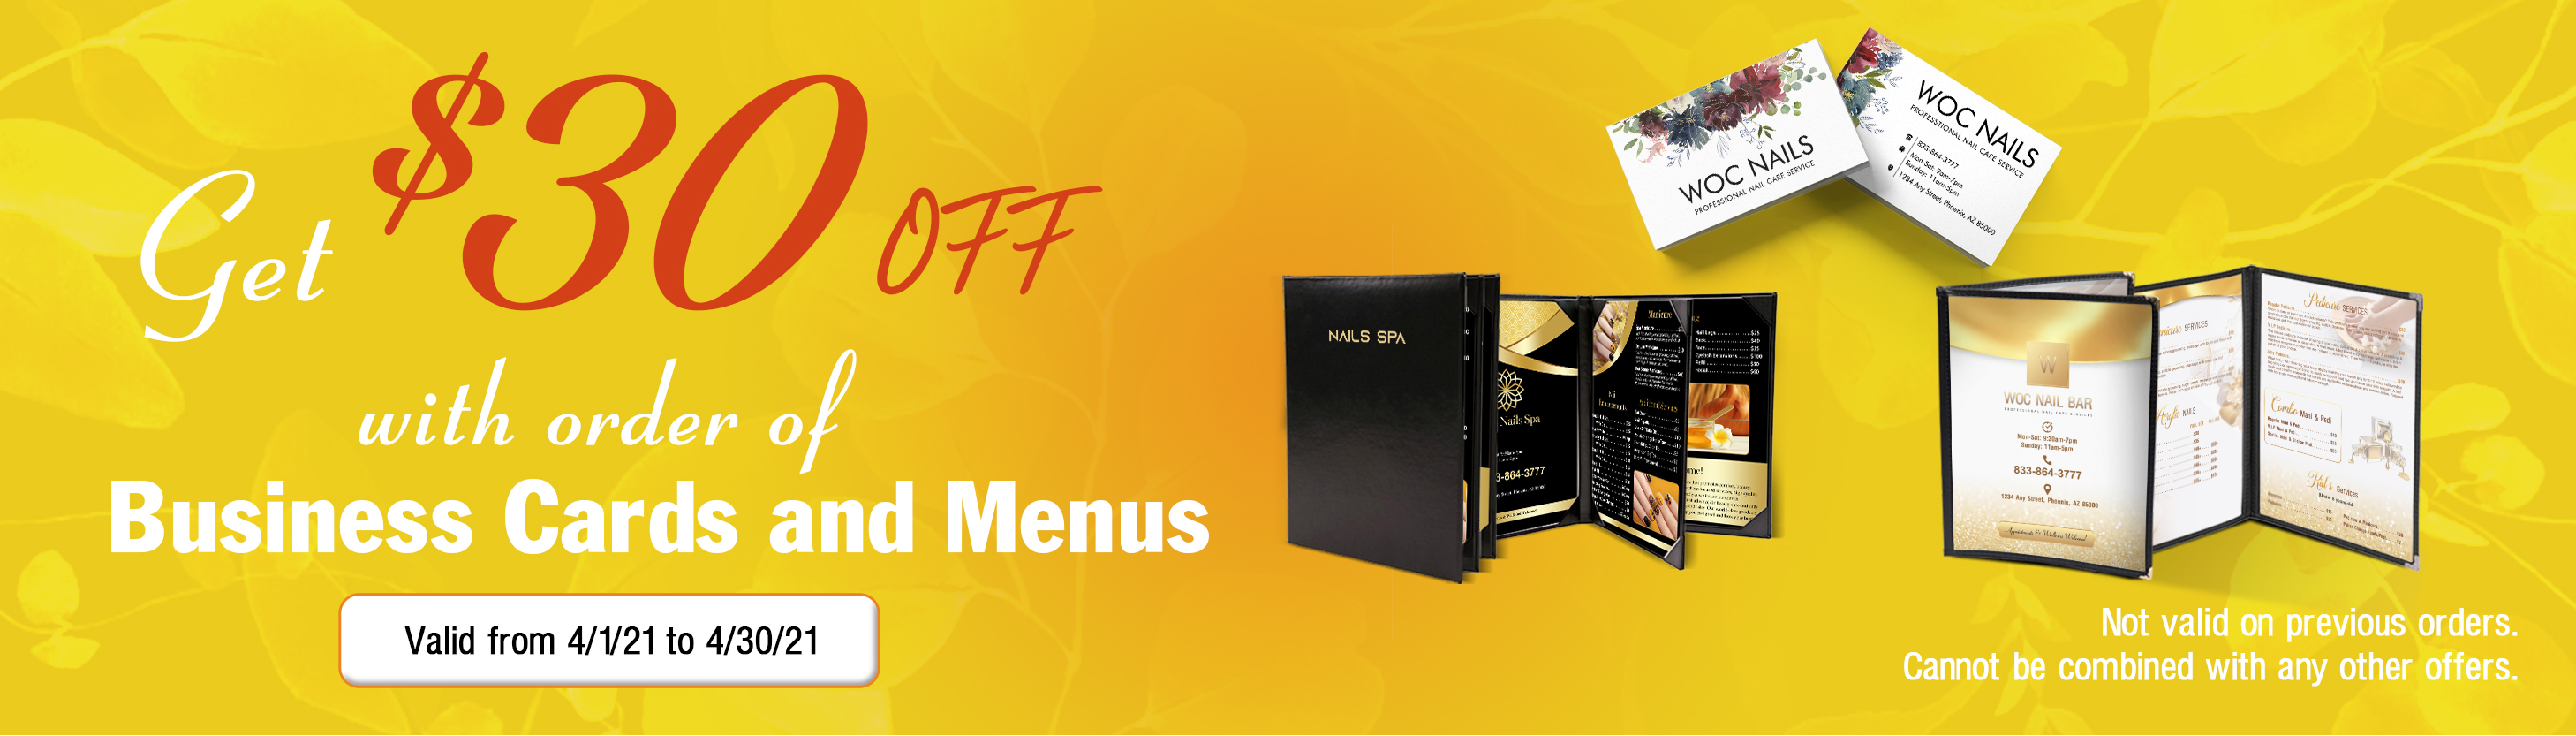 Get $30 off with of order Business Cards and Menus